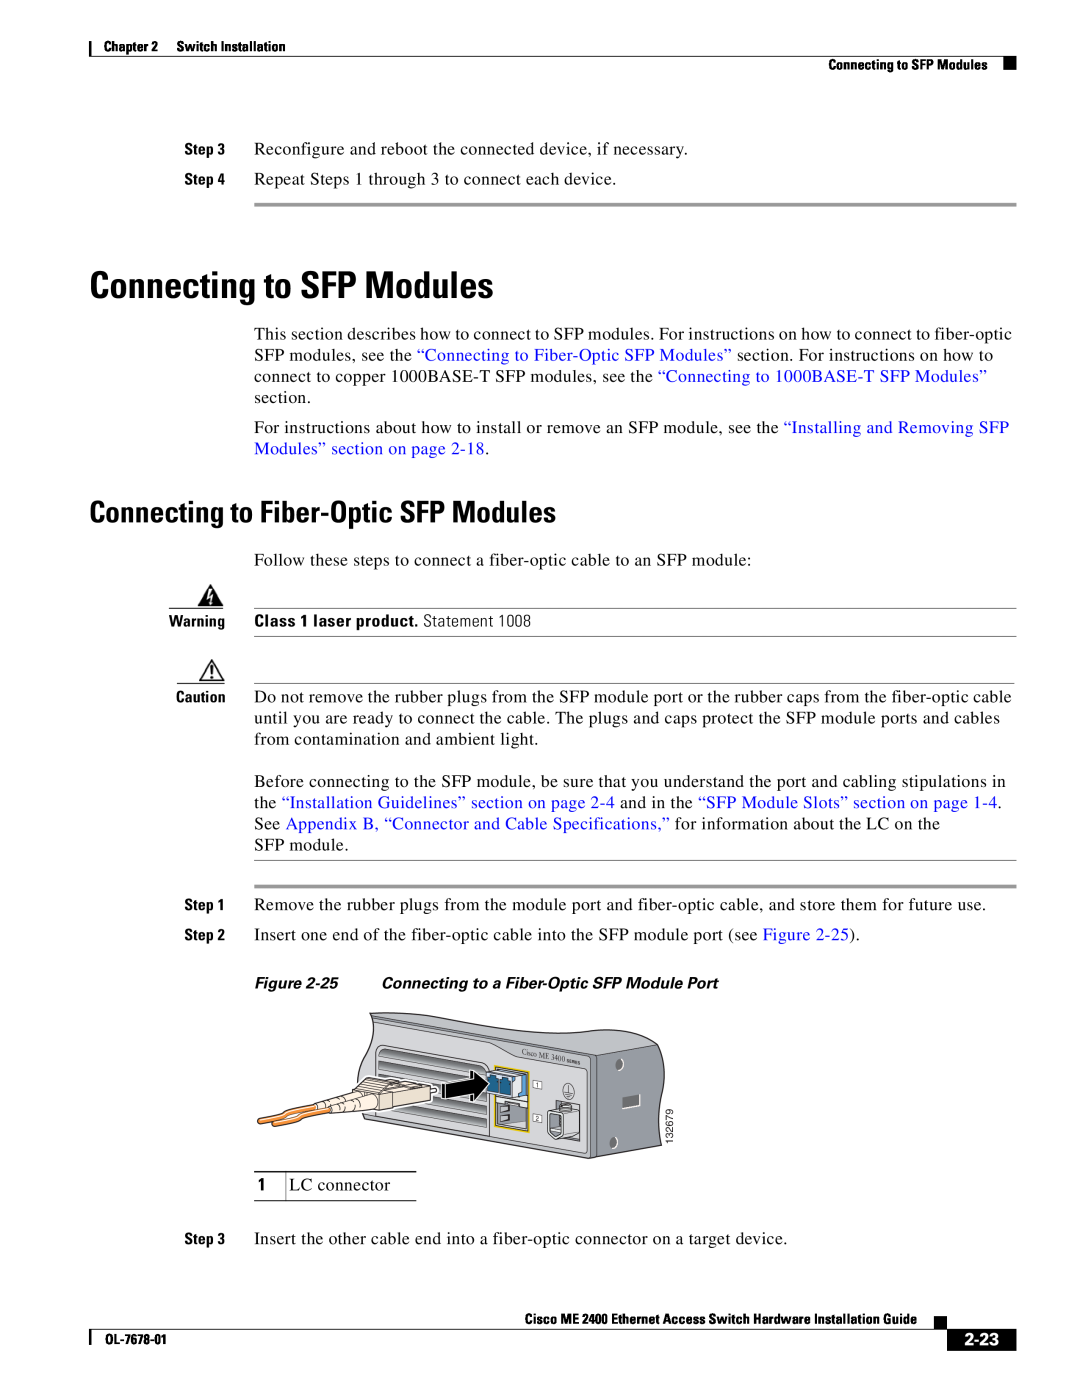 Cisco Systems ME 2400 manual Connecting to SFP Modules, Connecting to Fiber-Optic SFP Modules, 2-23 